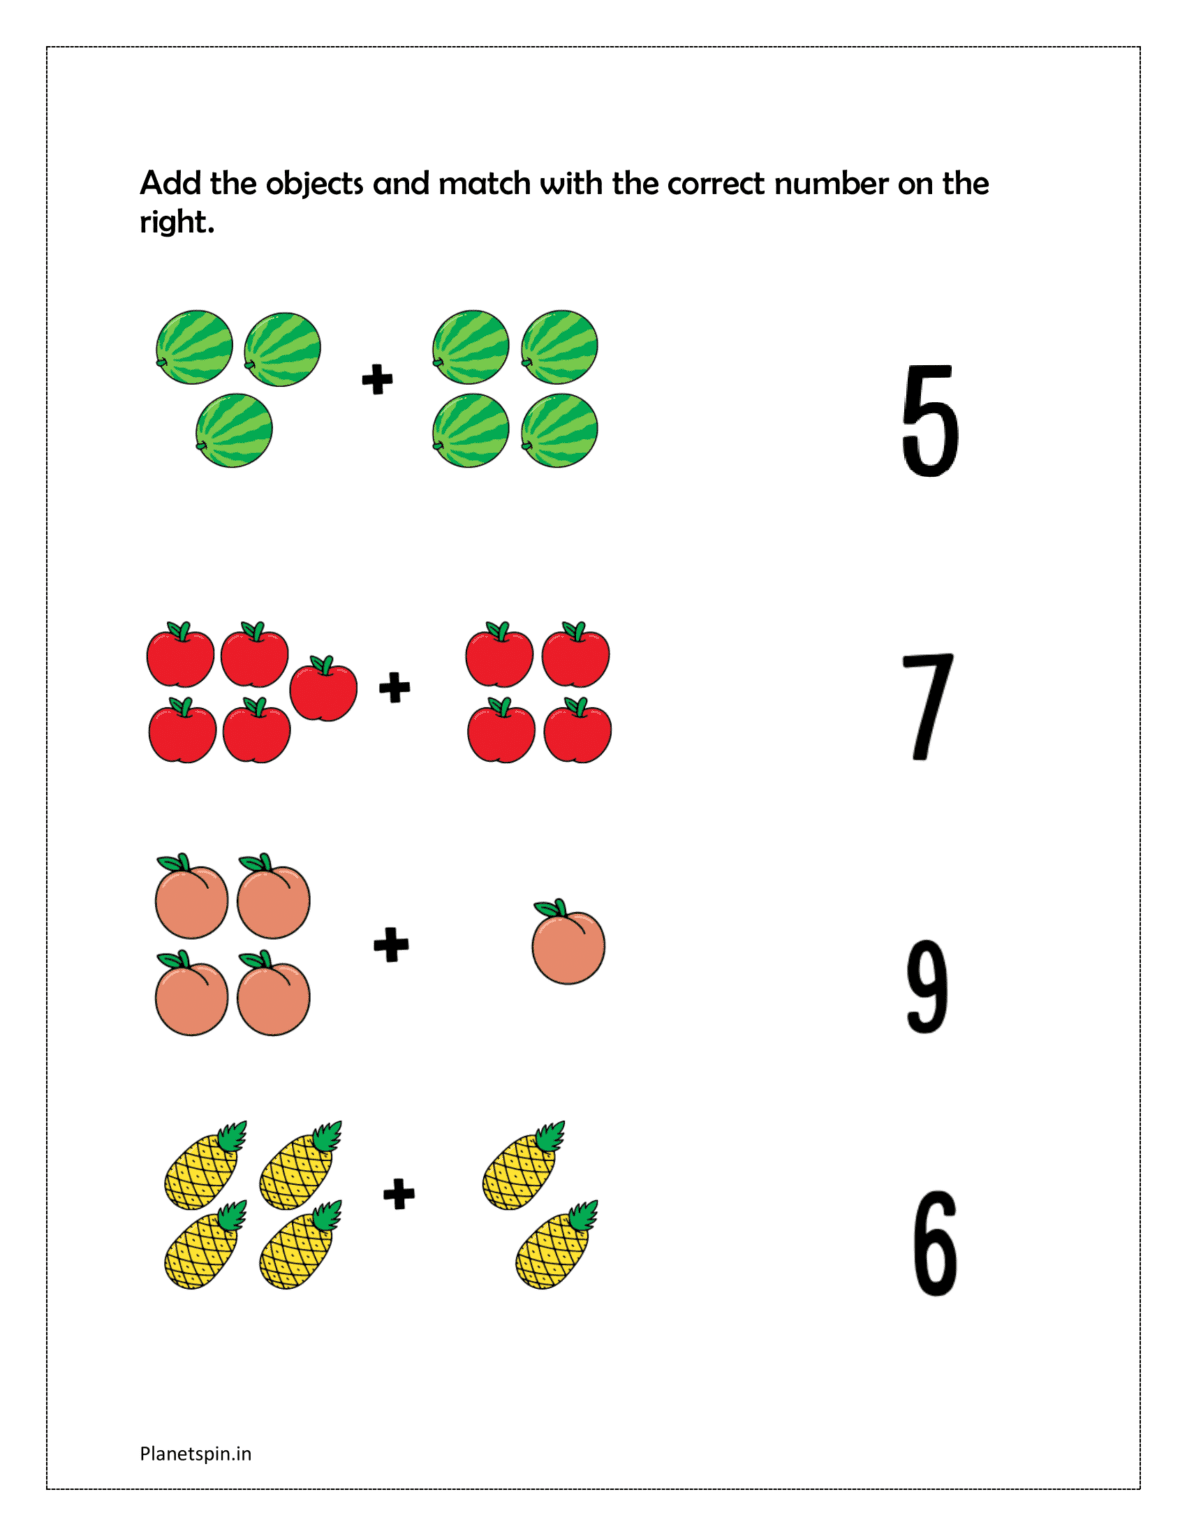 Worksheets for addition for kindergarten | Planetspin.in